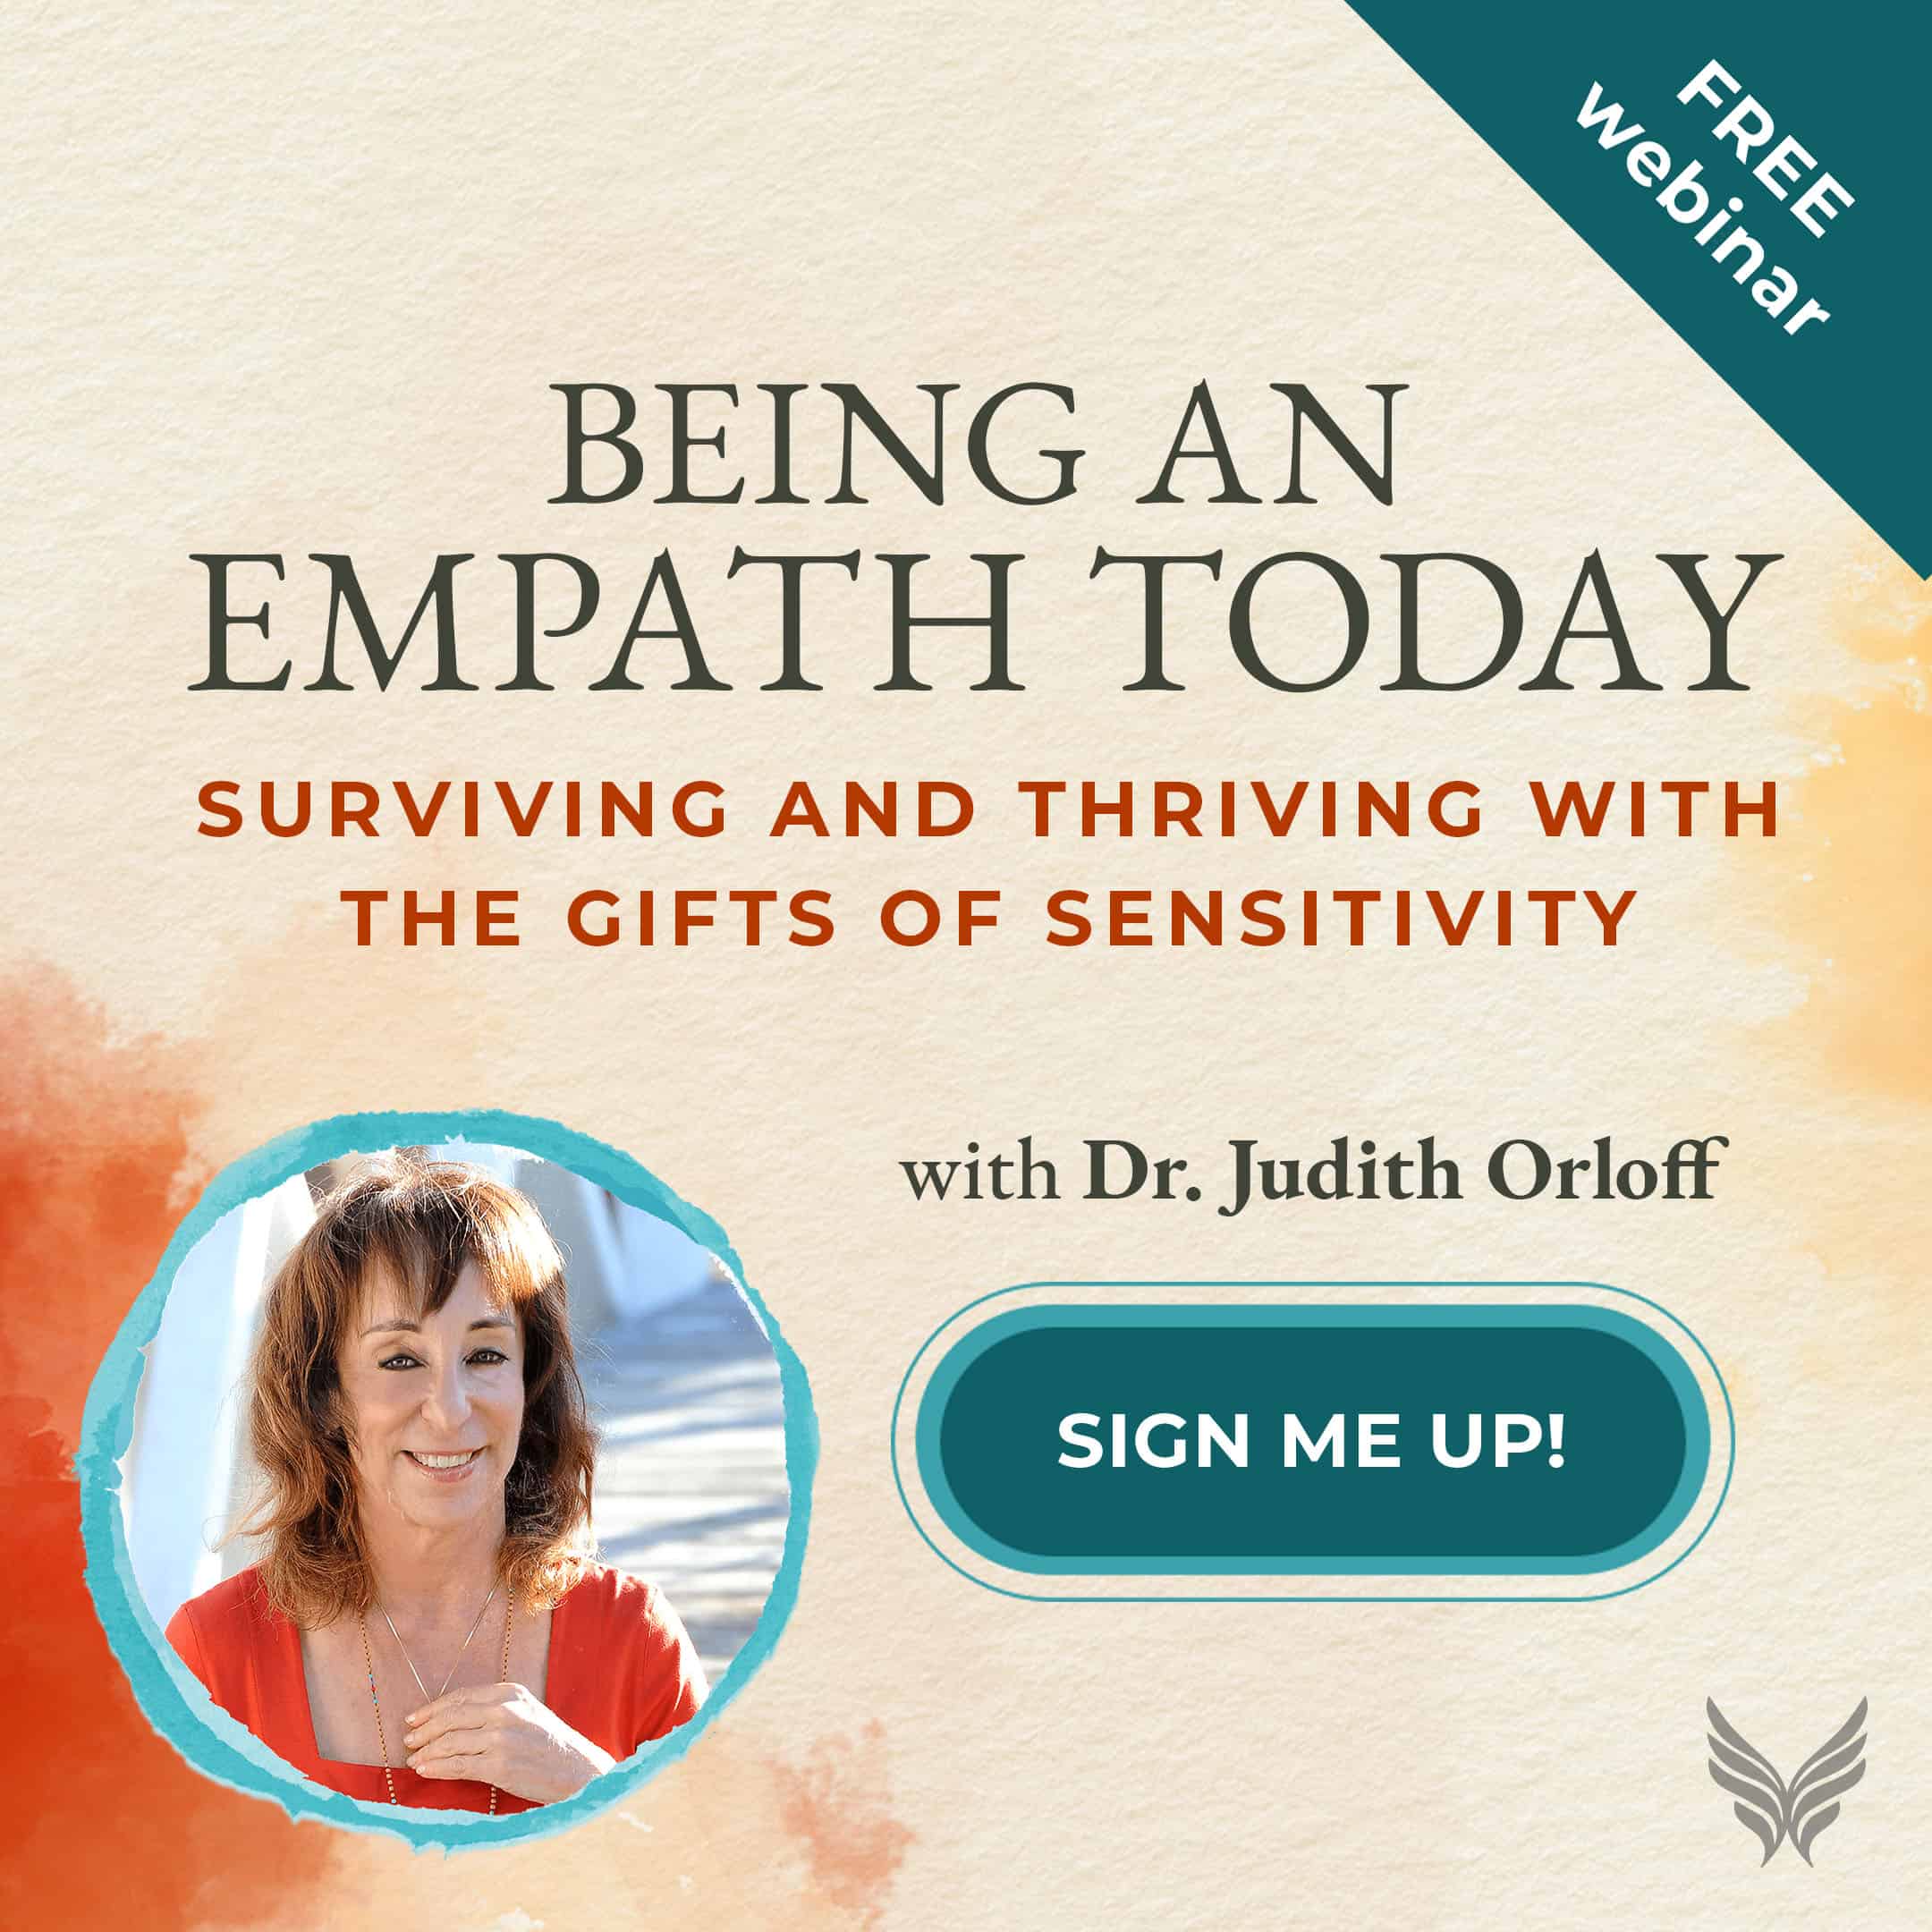 Being an Empath Today
SURVIVING AND THRIVING WITH THE GIFTS OF SENSITIVITY